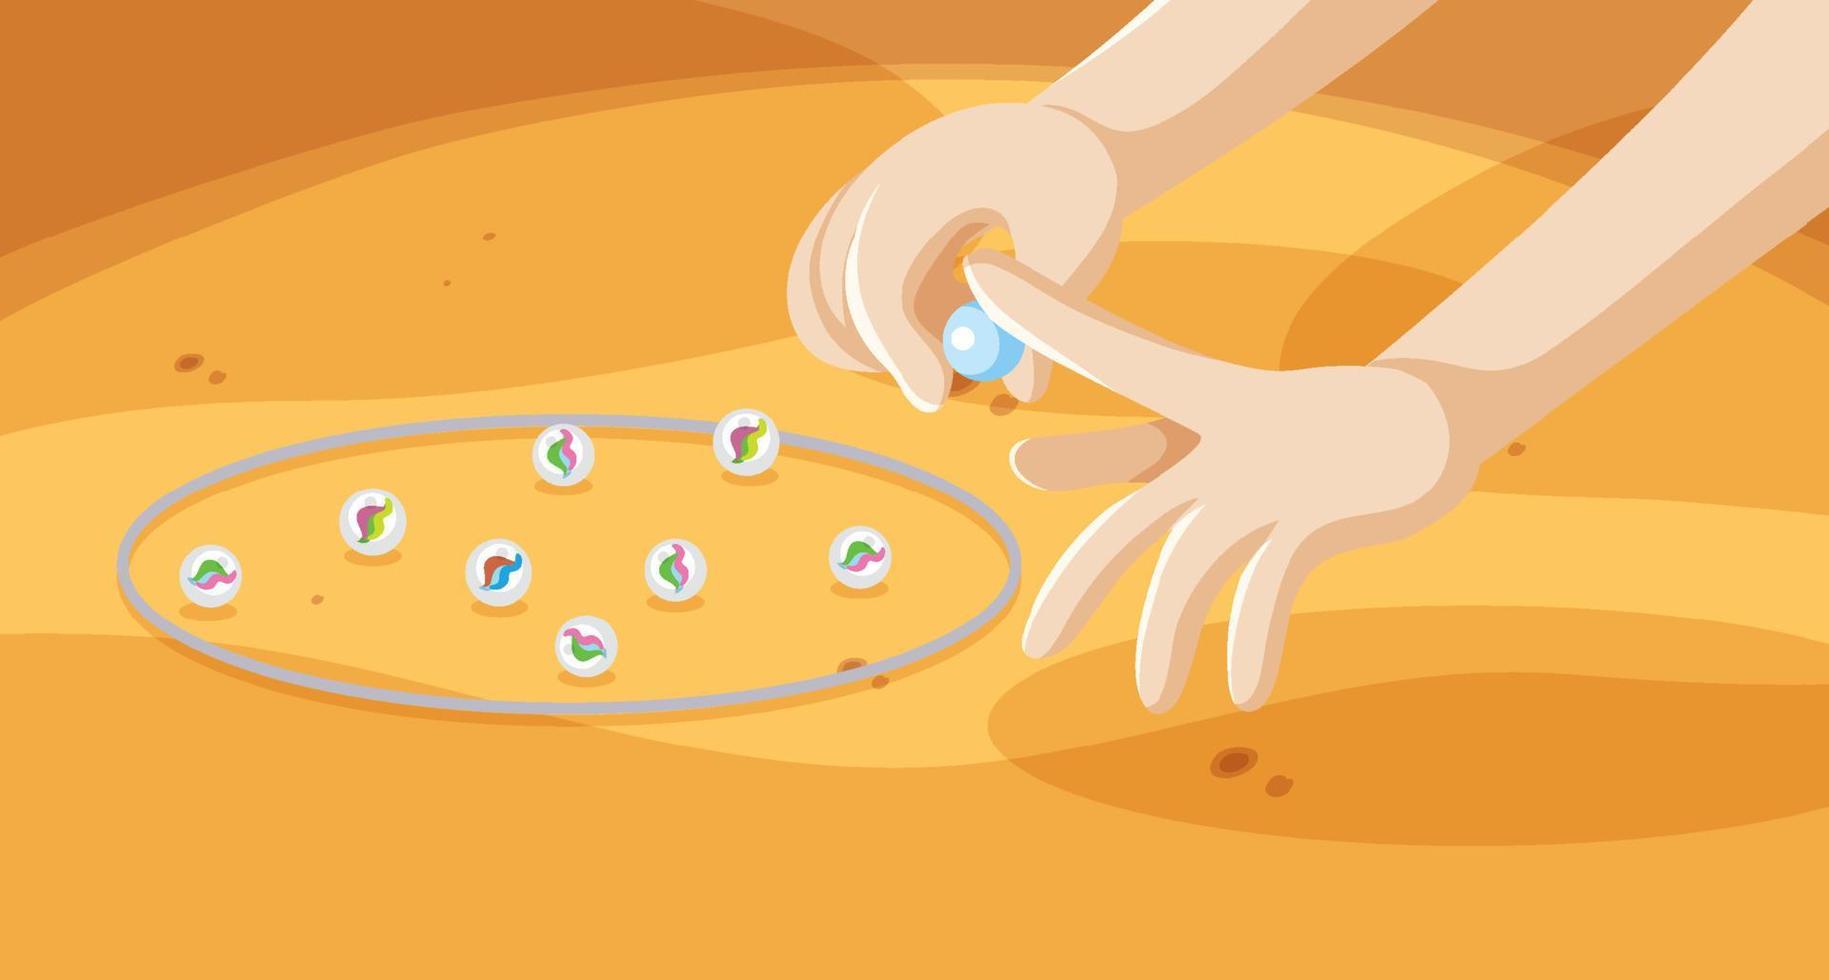 Flicking hand and marbles vector